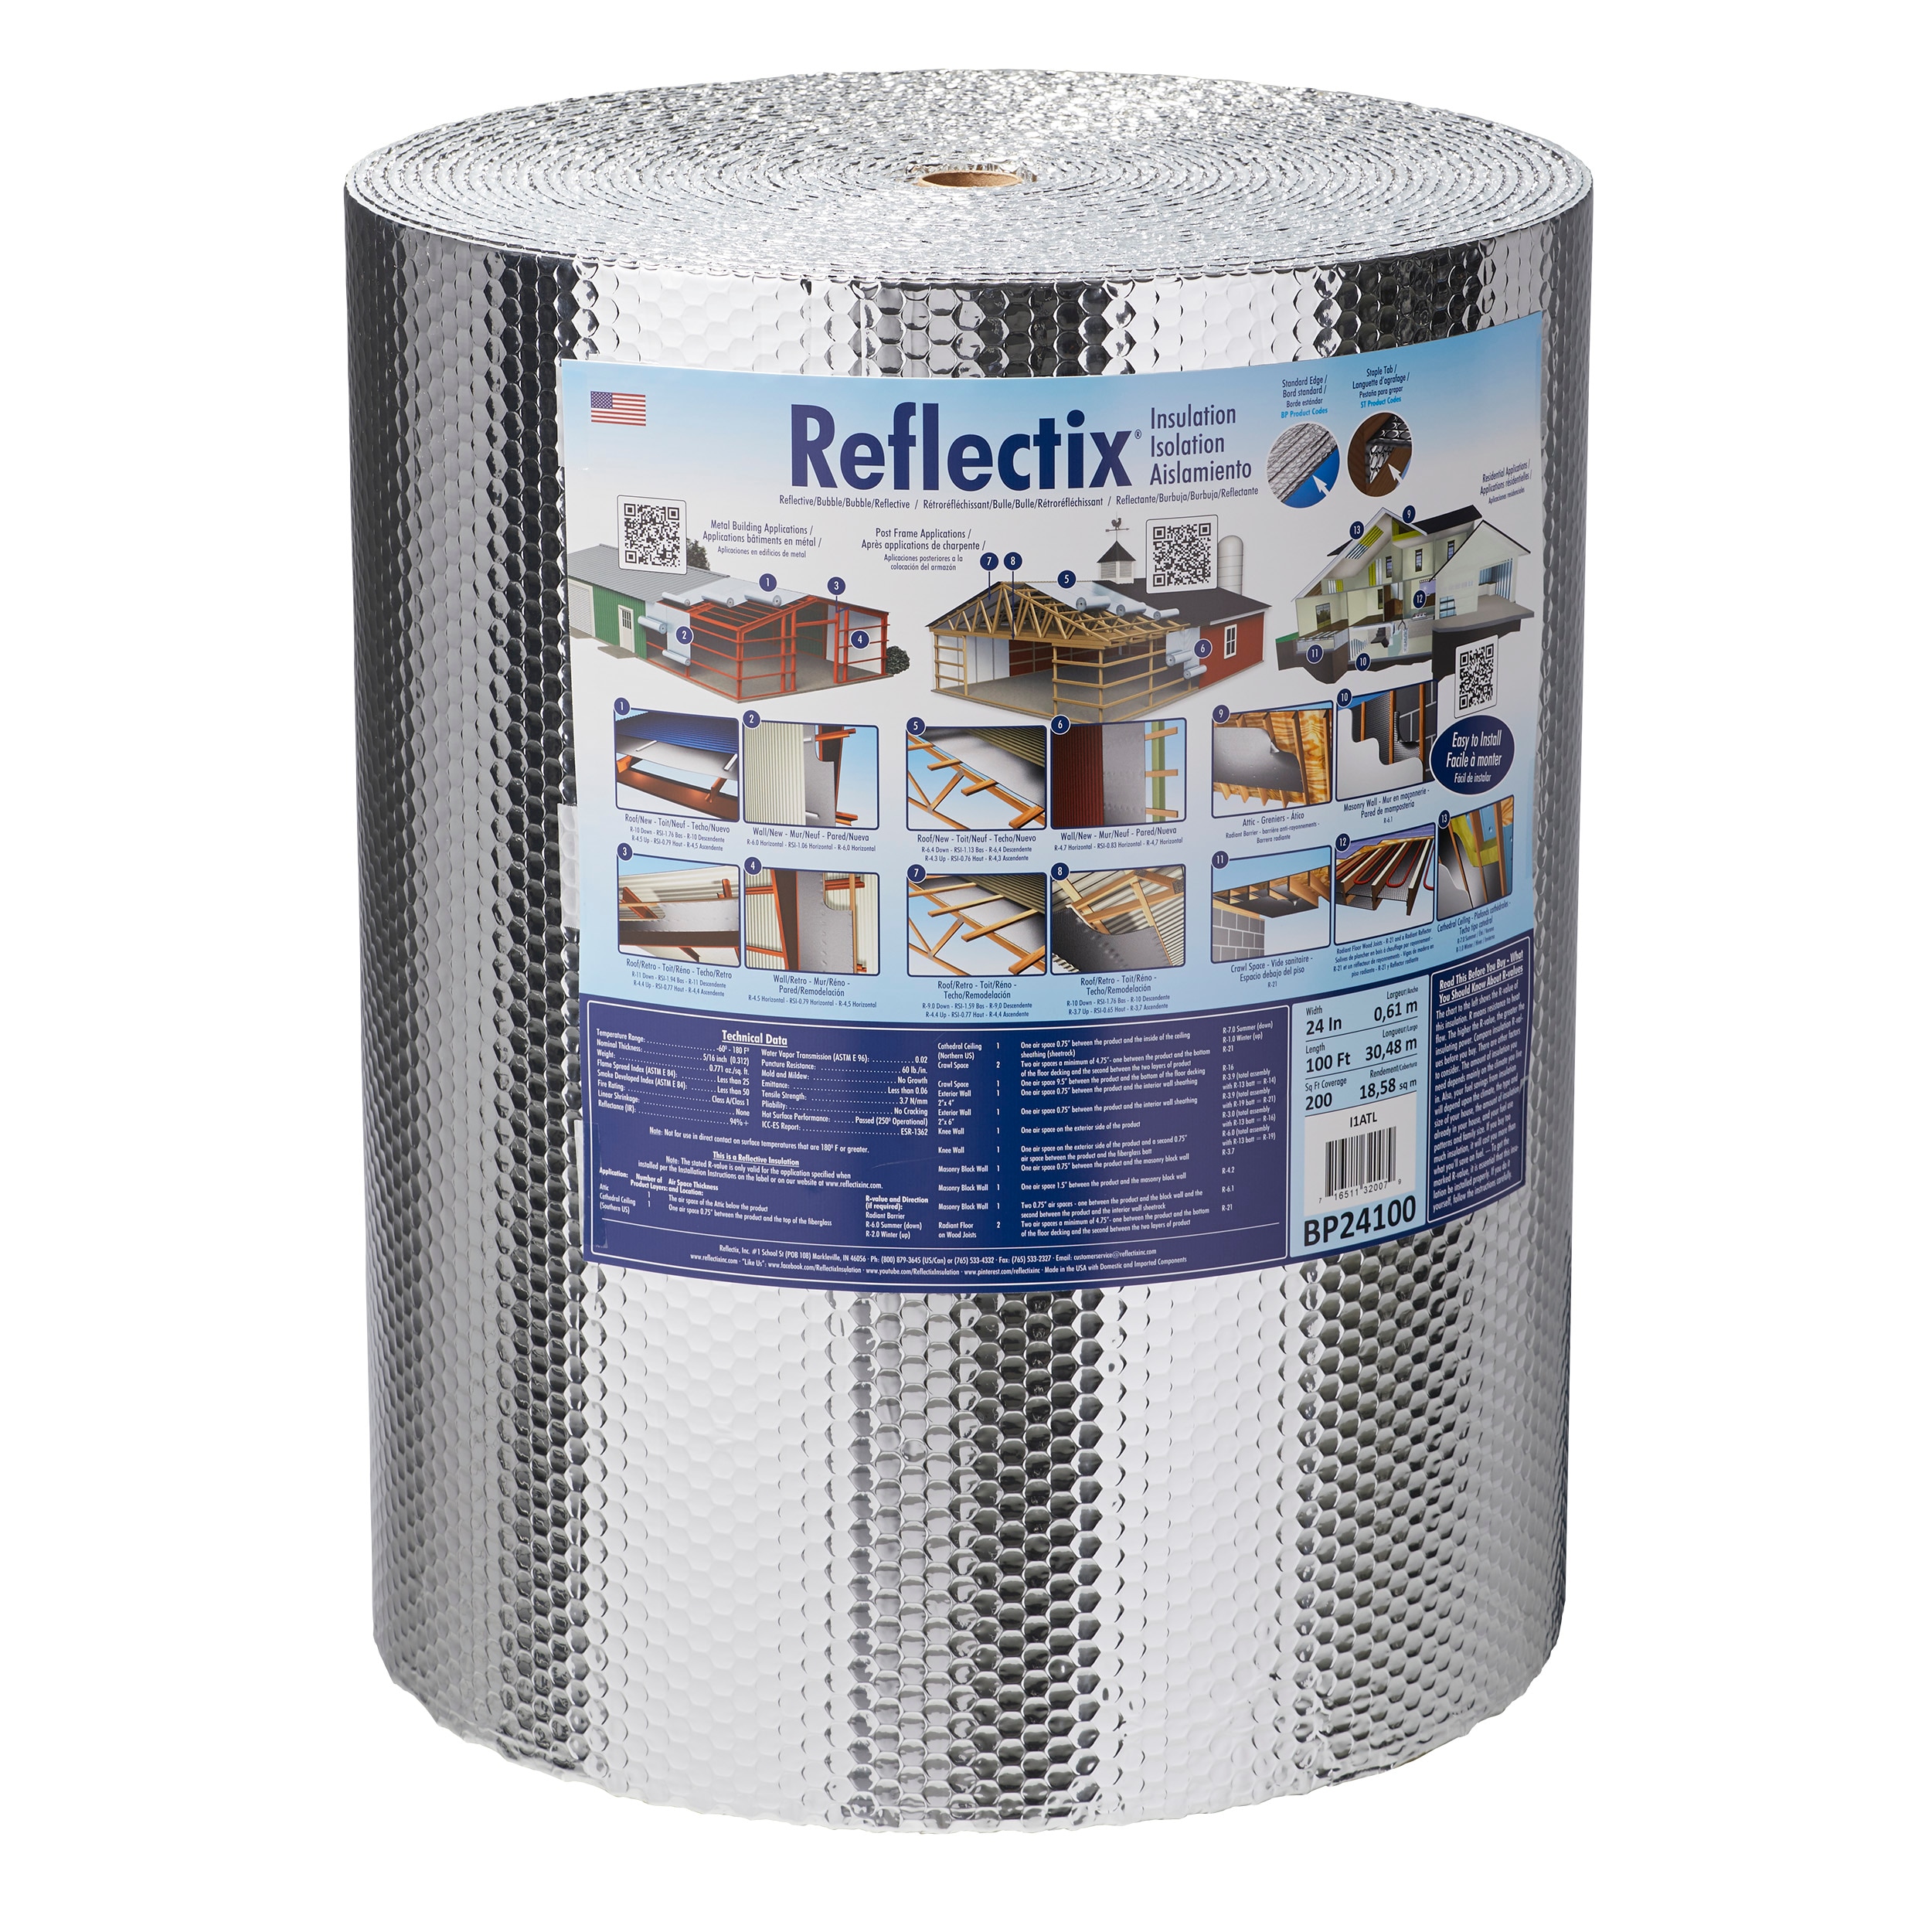 Reflectix 100-sq ft Double Bubble Insulation Designed Reflective Roll Insulation 